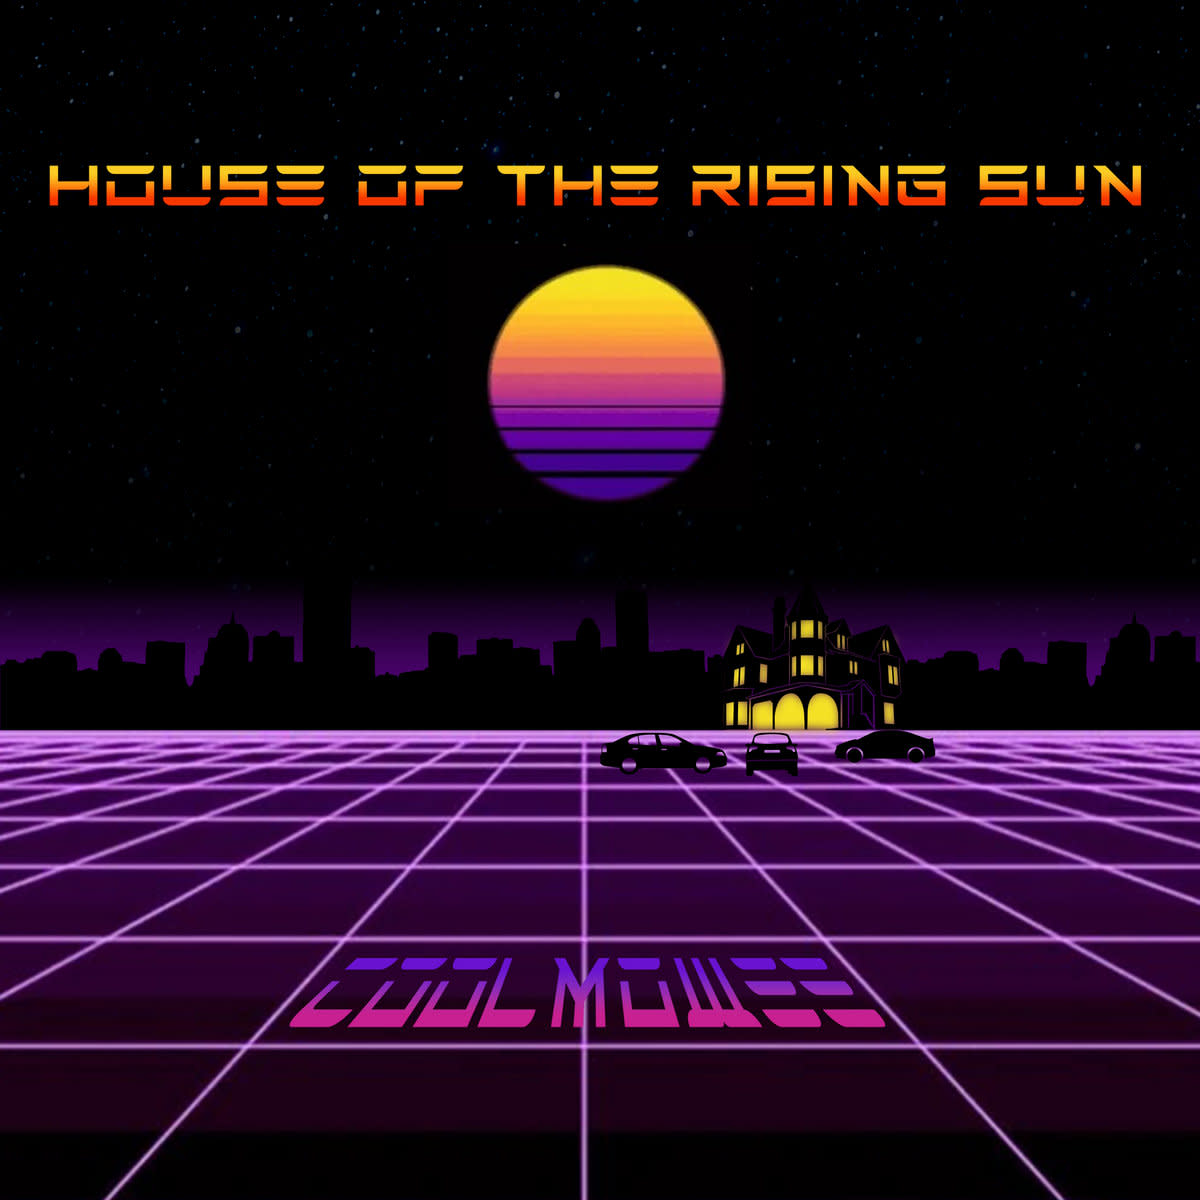 synth-single-review-house-of-the-rising-sun-covered-by-coolmowee